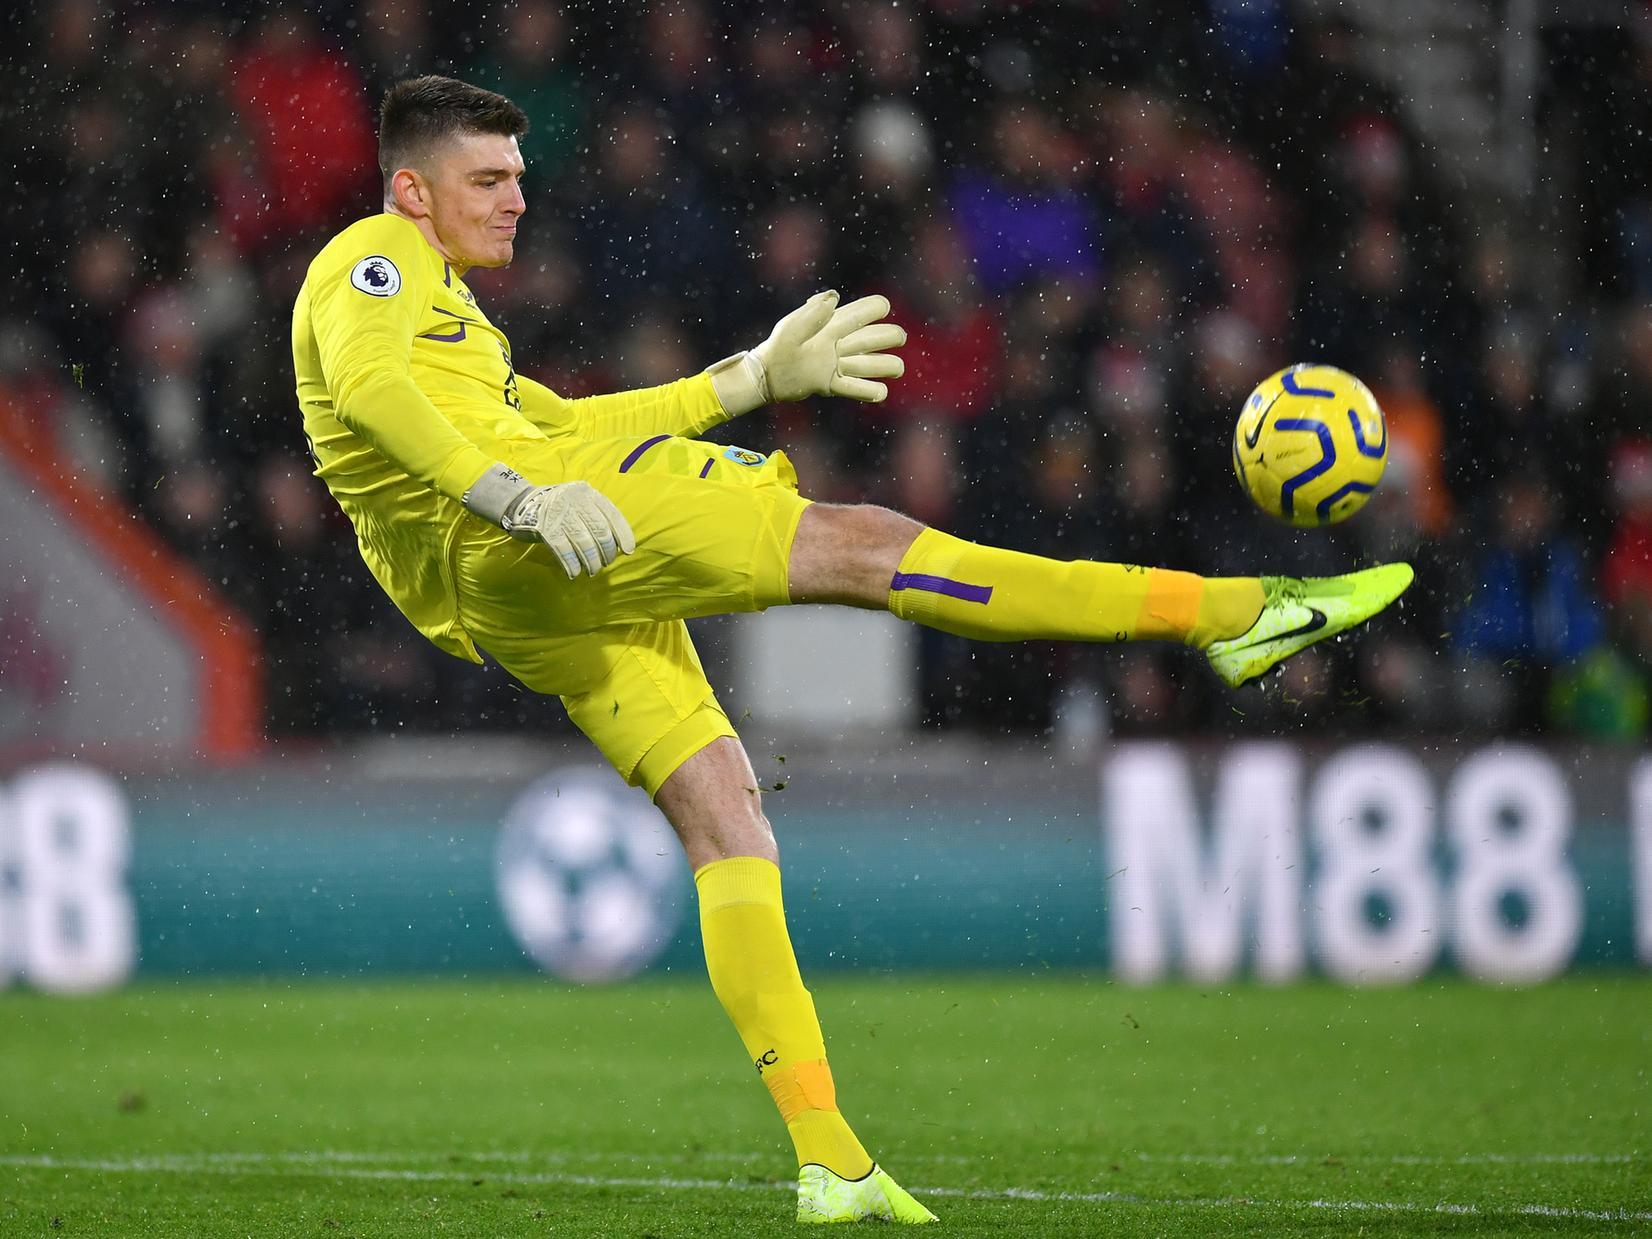 The goalkeeper was signed for next-to-nothing from Charlton Athletic and is now considered to be a regular in Gareth Southgate's England squads. He's now kept 24 clean sheets in 66 appearances for Burnley.